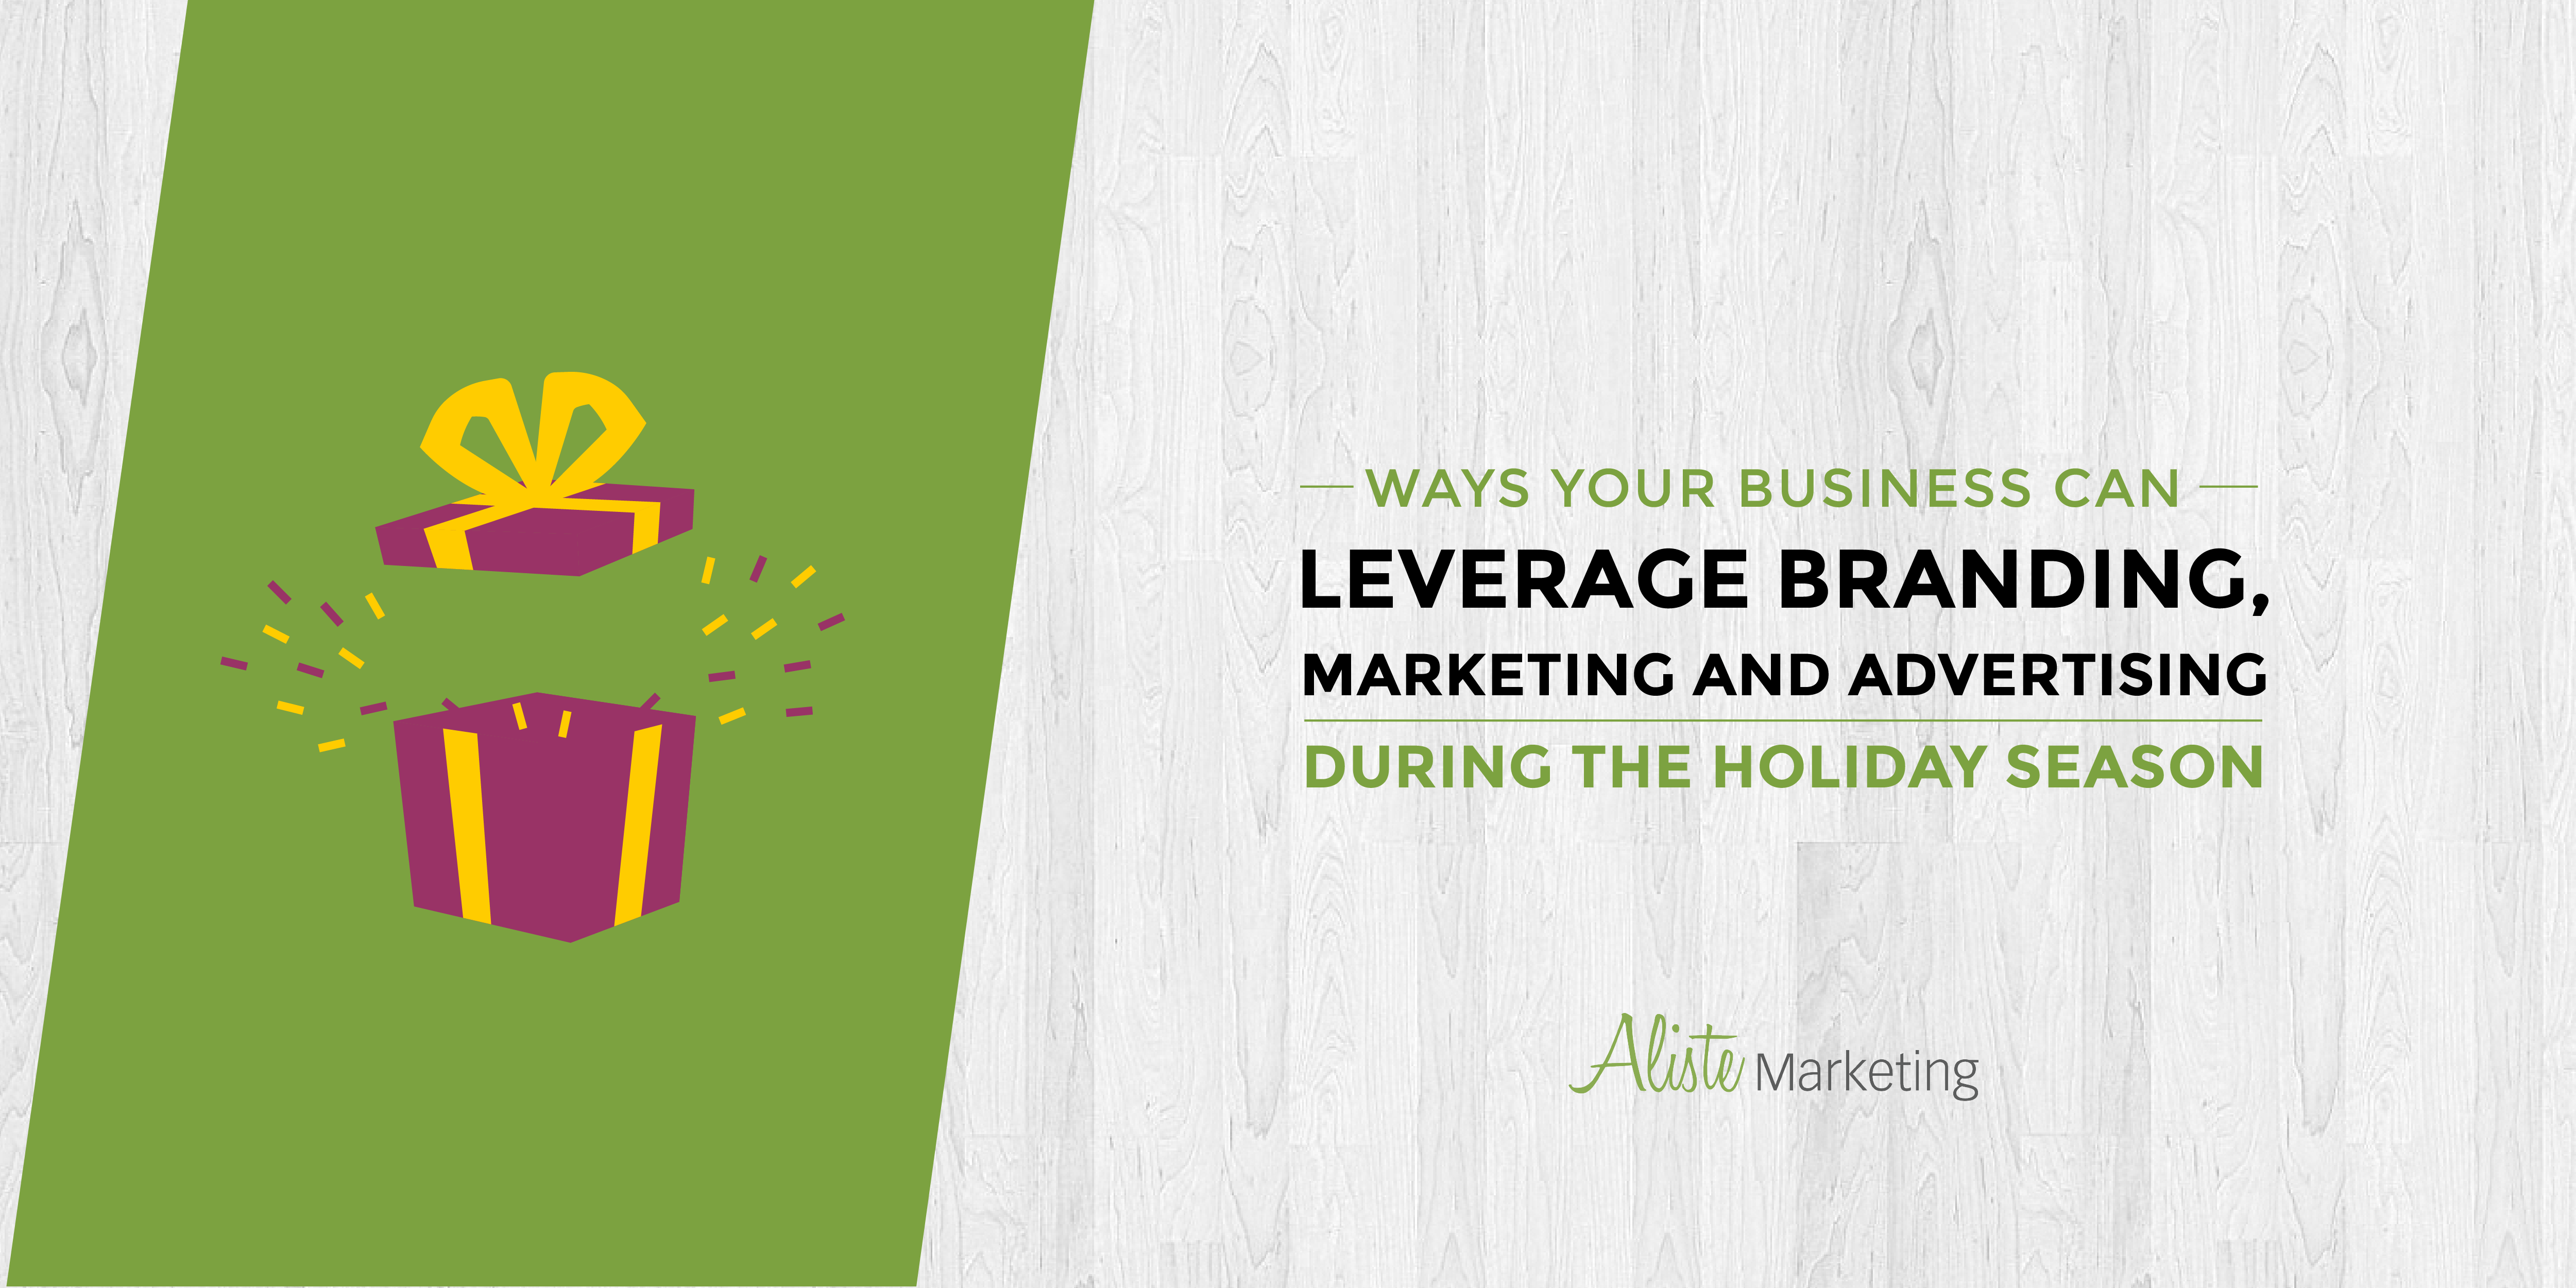 Ways Your Business Can Leverage Branding, Marketing & Advertising During the Holiday Season Graphic